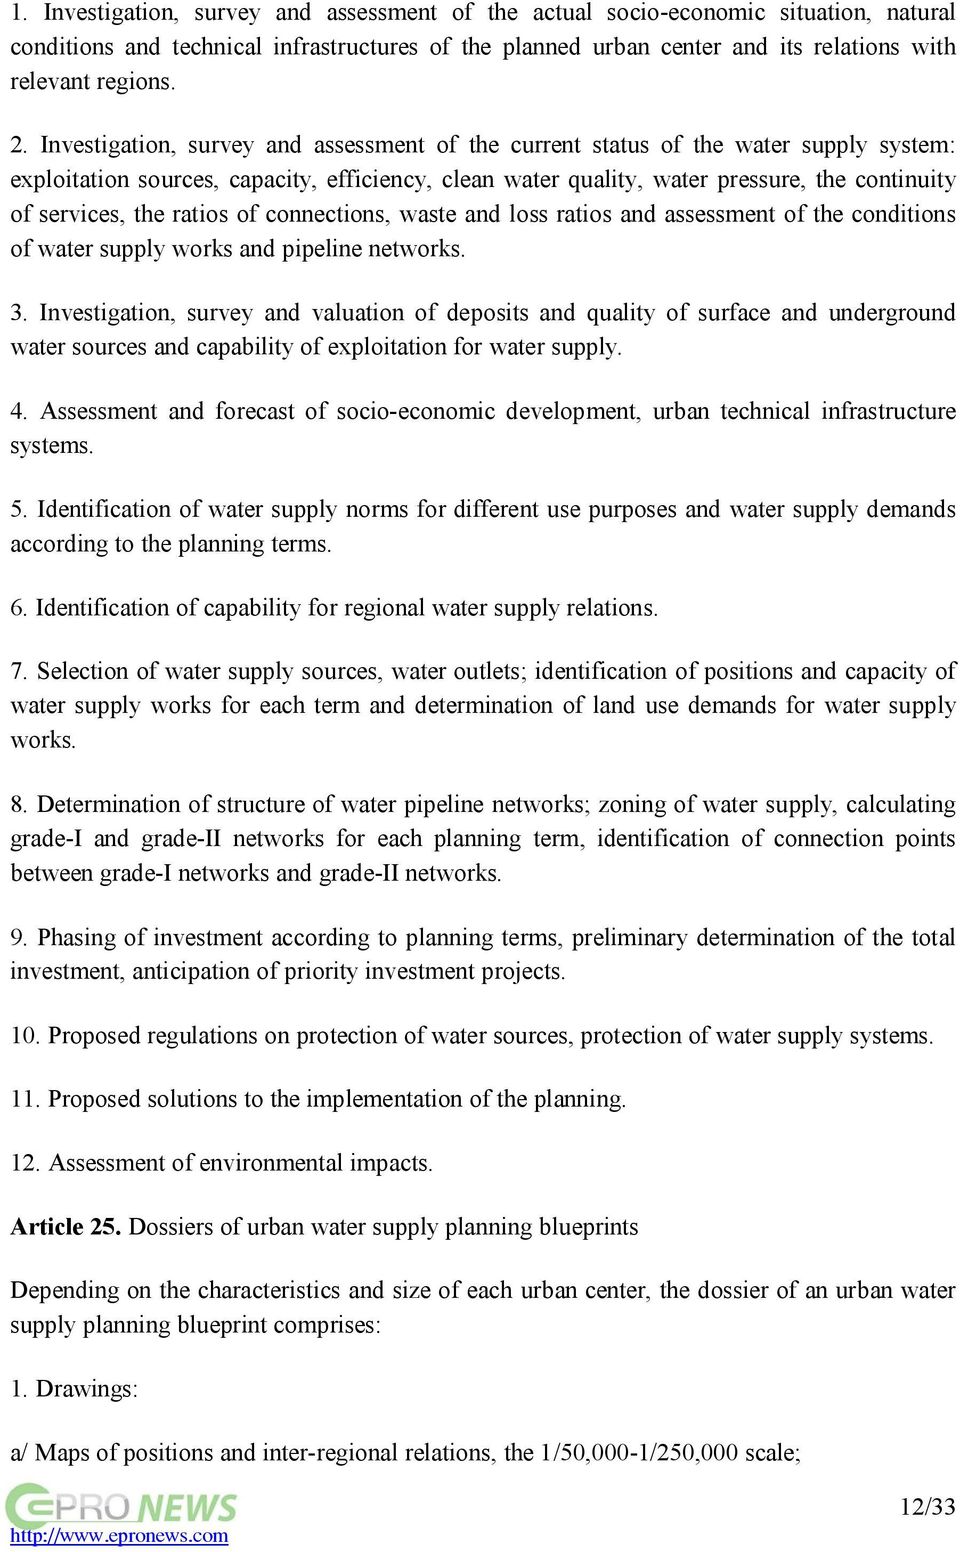 ratios of connections, waste and loss ratios and assessment of the conditions of water supply works and pipeline networks. 3.